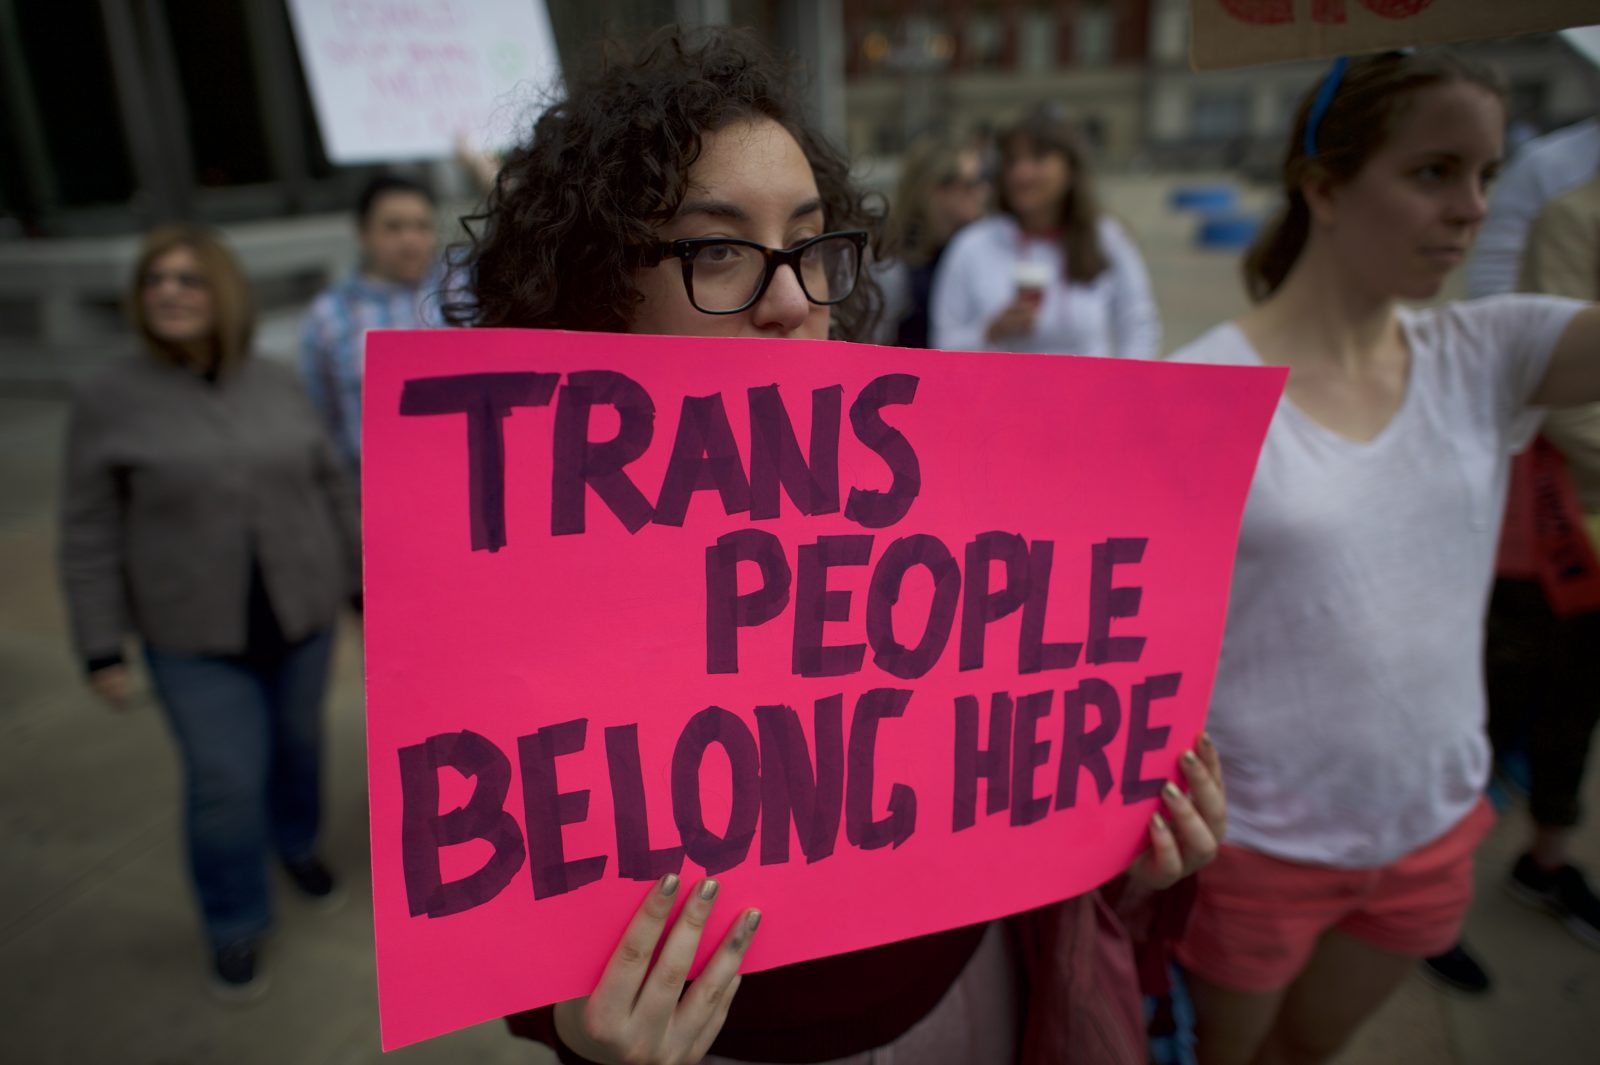 Women Who Love Shemales - Shemale: Why you should never use this anti-trans slur